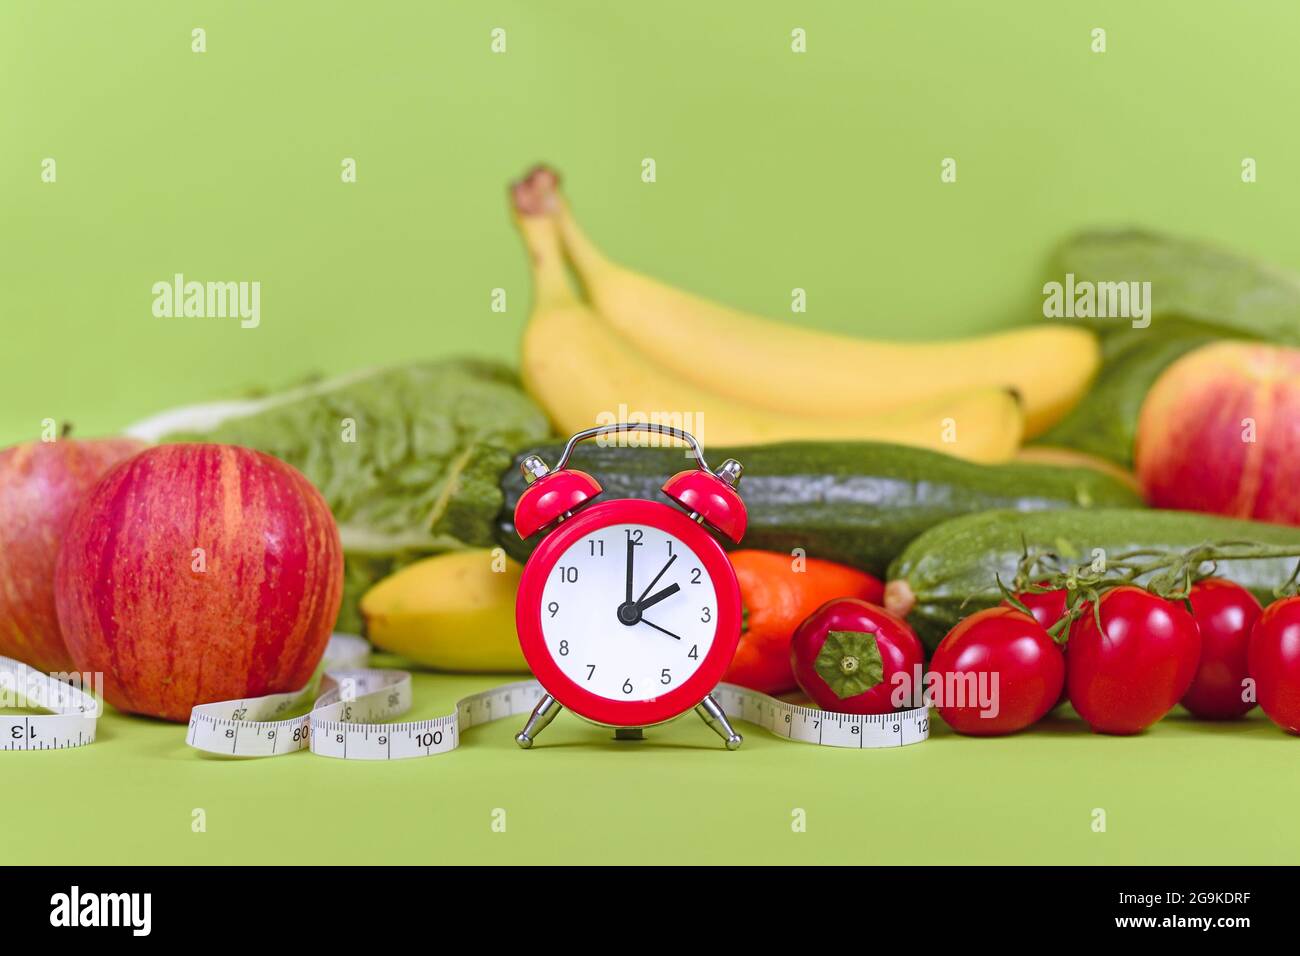 Diet concept for loosing weight with only eating healthy food at certain times with vegetables, fruits, measuring tape and clock Stock Photo